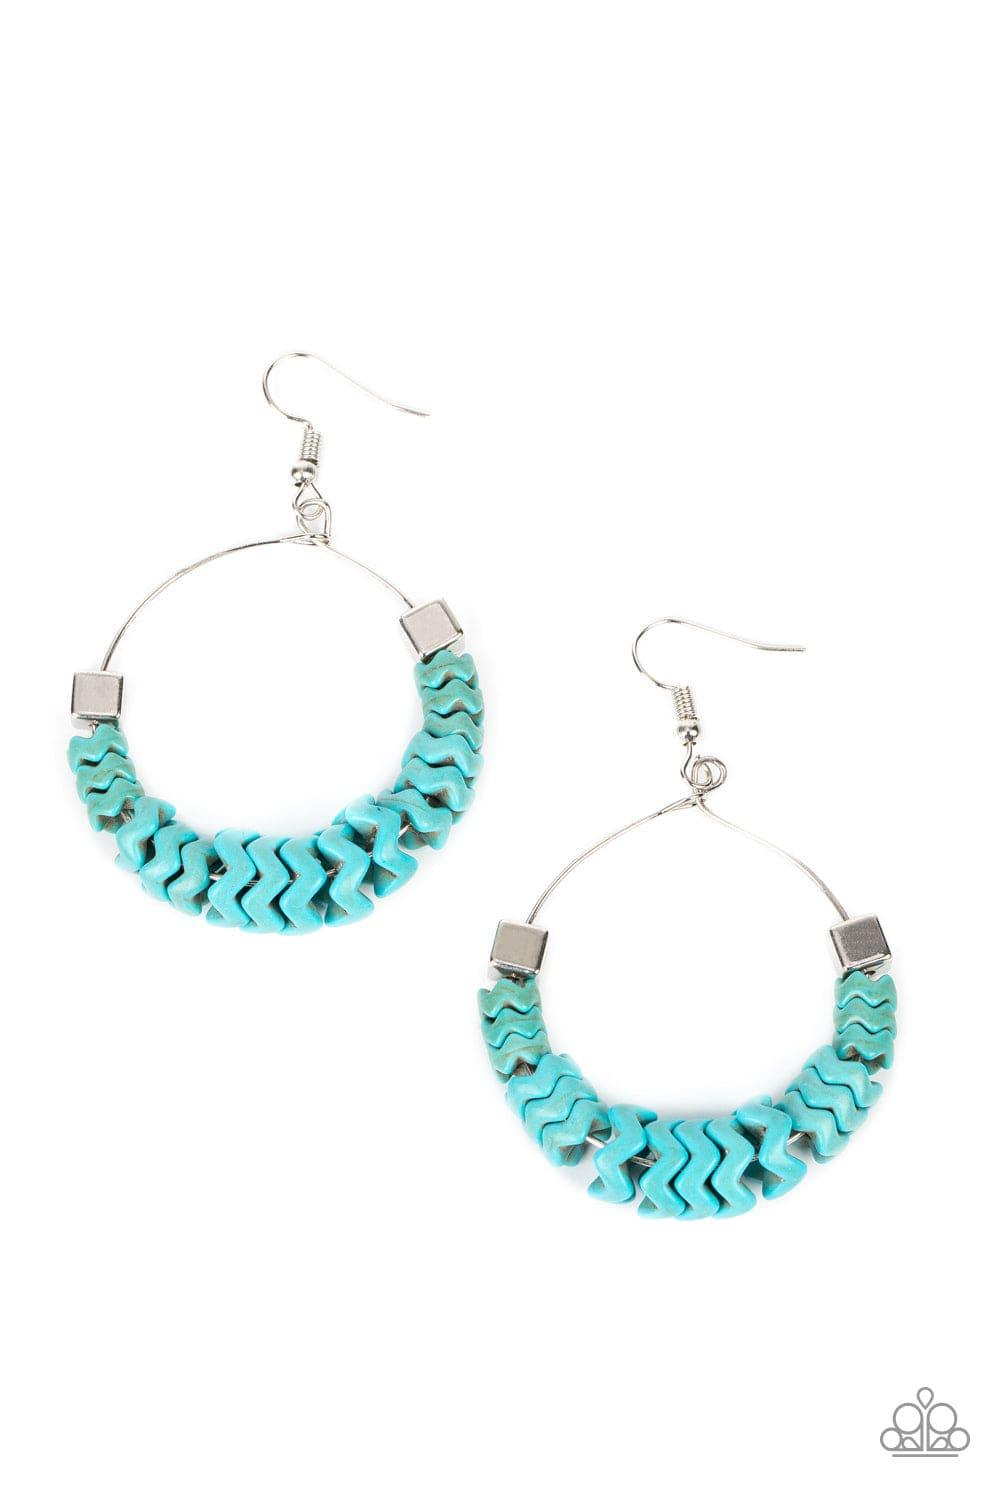 Paparazzi Accessories - Capriciously Crimped - Blue Earrings - Bling by JessieK